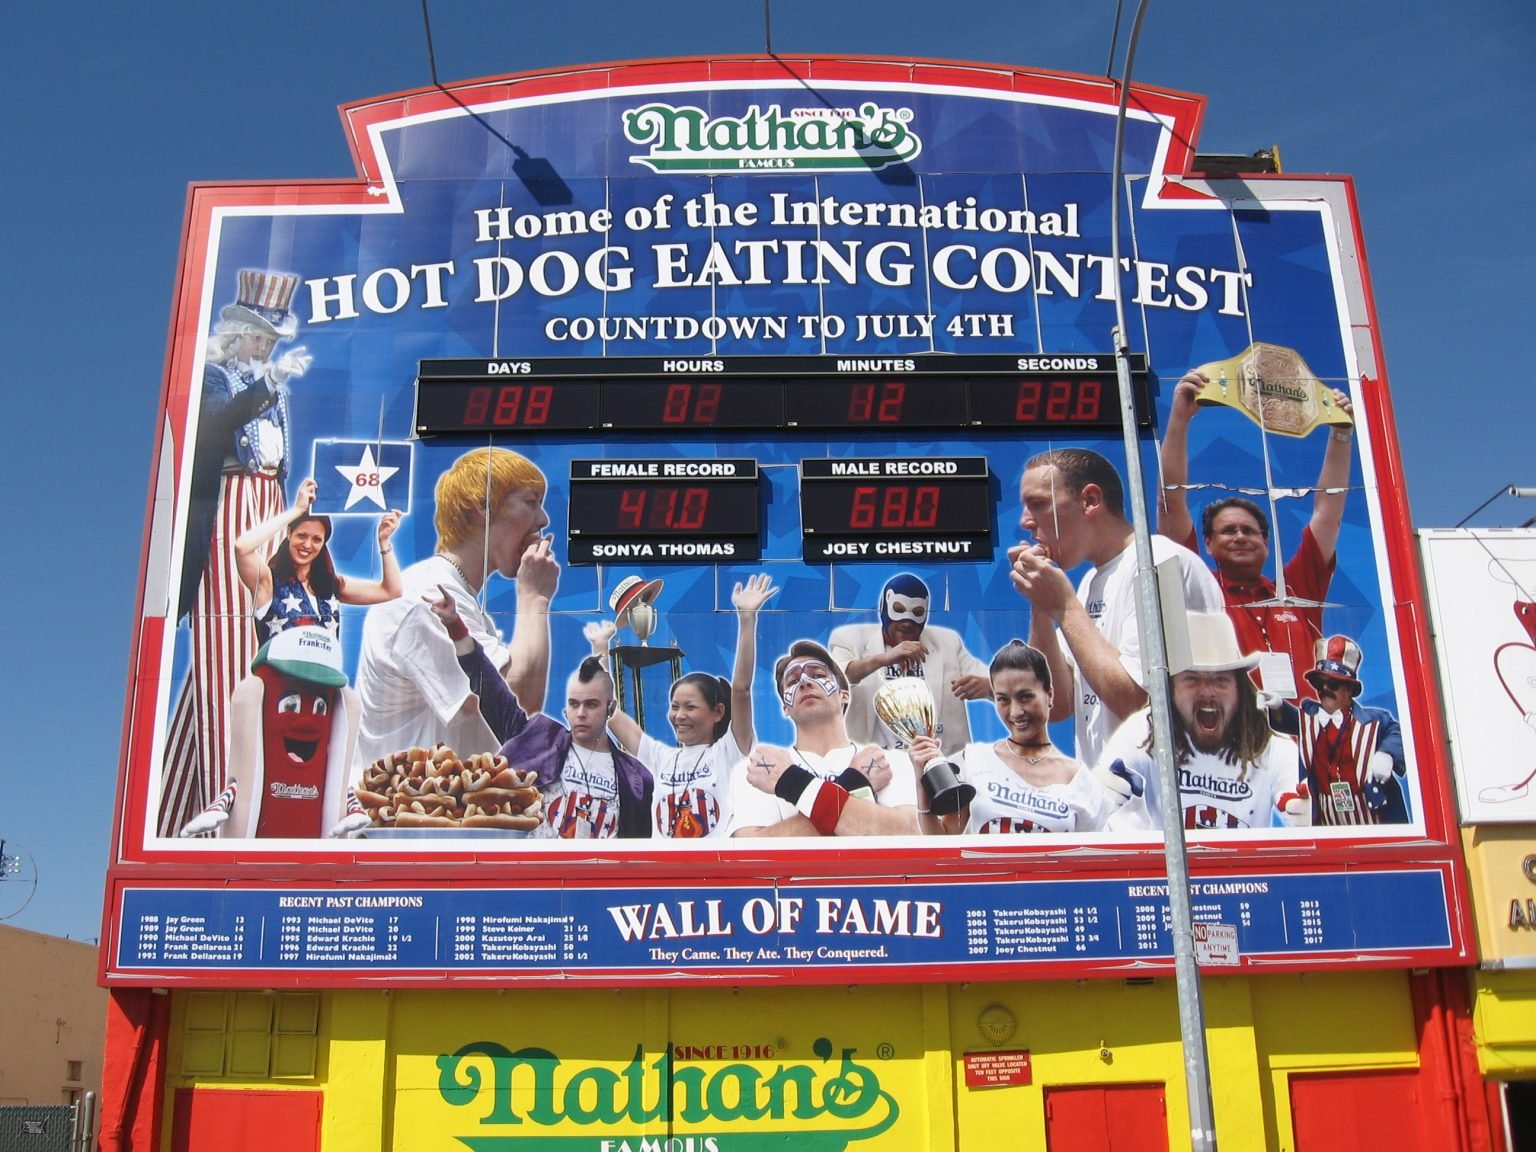 Nathan's Hot Dog Eating Contest Will Continue With New Rules